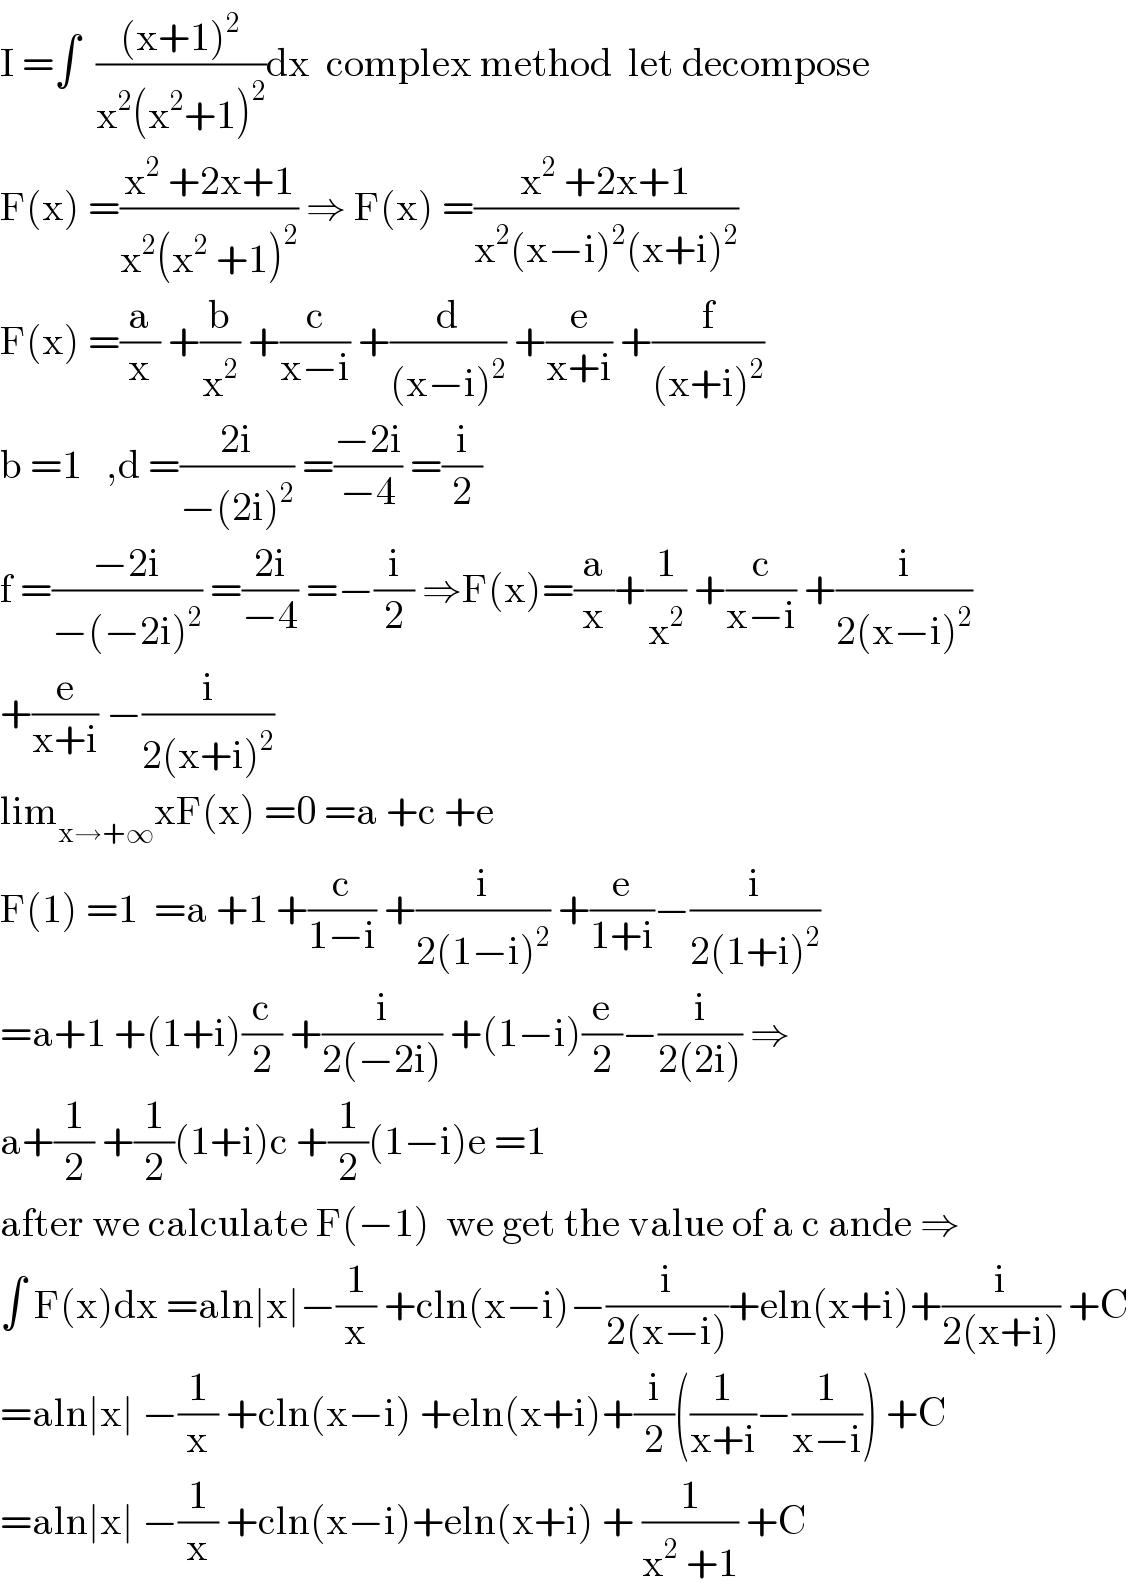 I =∫  (((x+1)^2 )/(x^2 (x^2 +1)^2 ))dx  complex method  let decompose  F(x) =((x^2  +2x+1)/(x^2 (x^2  +1)^2 )) ⇒ F(x) =((x^2  +2x+1)/(x^2 (x−i)^2 (x+i)^2 ))  F(x) =(a/x) +(b/x^2 ) +(c/(x−i)) +(d/((x−i)^2 )) +(e/(x+i)) +(f/((x+i)^2 ))  b =1   ,d =((2i)/(−(2i)^2 )) =((−2i)/(−4)) =(i/2)  f =((−2i)/(−(−2i)^2 )) =((2i)/(−4)) =−(i/2) ⇒F(x)=(a/x)+(1/x^2 ) +(c/(x−i)) +(i/(2(x−i)^2 ))  +(e/(x+i)) −(i/(2(x+i)^2 ))  lim_(x→+∞) xF(x) =0 =a +c +e  F(1) =1  =a +1 +(c/(1−i)) +(i/(2(1−i)^2 )) +(e/(1+i))−(i/(2(1+i)^2 ))  =a+1 +(1+i)(c/2) +(i/(2(−2i))) +(1−i)(e/2)−(i/(2(2i))) ⇒  a+(1/2) +(1/2)(1+i)c +(1/2)(1−i)e =1  after we calculate F(−1)  we get the value of a c ande ⇒  ∫ F(x)dx =aln∣x∣−(1/x) +cln(x−i)−(i/(2(x−i)))+eln(x+i)+(i/(2(x+i))) +C  =aln∣x∣ −(1/x) +cln(x−i) +eln(x+i)+(i/2)((1/(x+i))−(1/(x−i))) +C  =aln∣x∣ −(1/x) +cln(x−i)+eln(x+i) + (1/(x^2  +1)) +C  